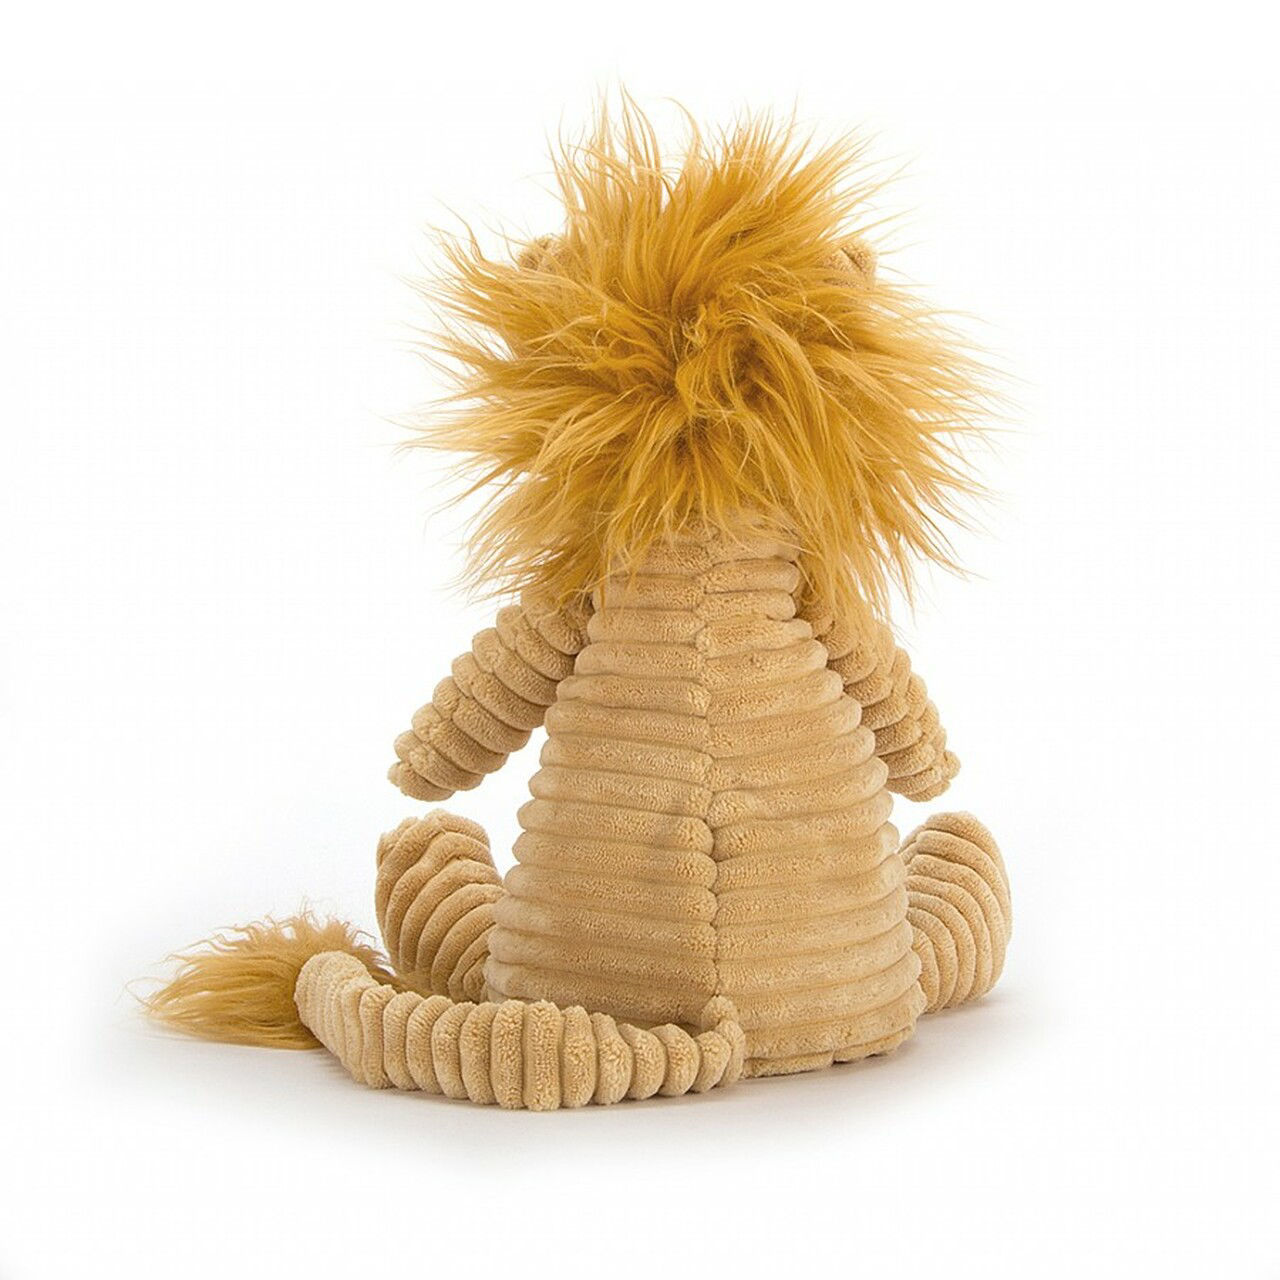 Picture of Lion  - Plush Toy